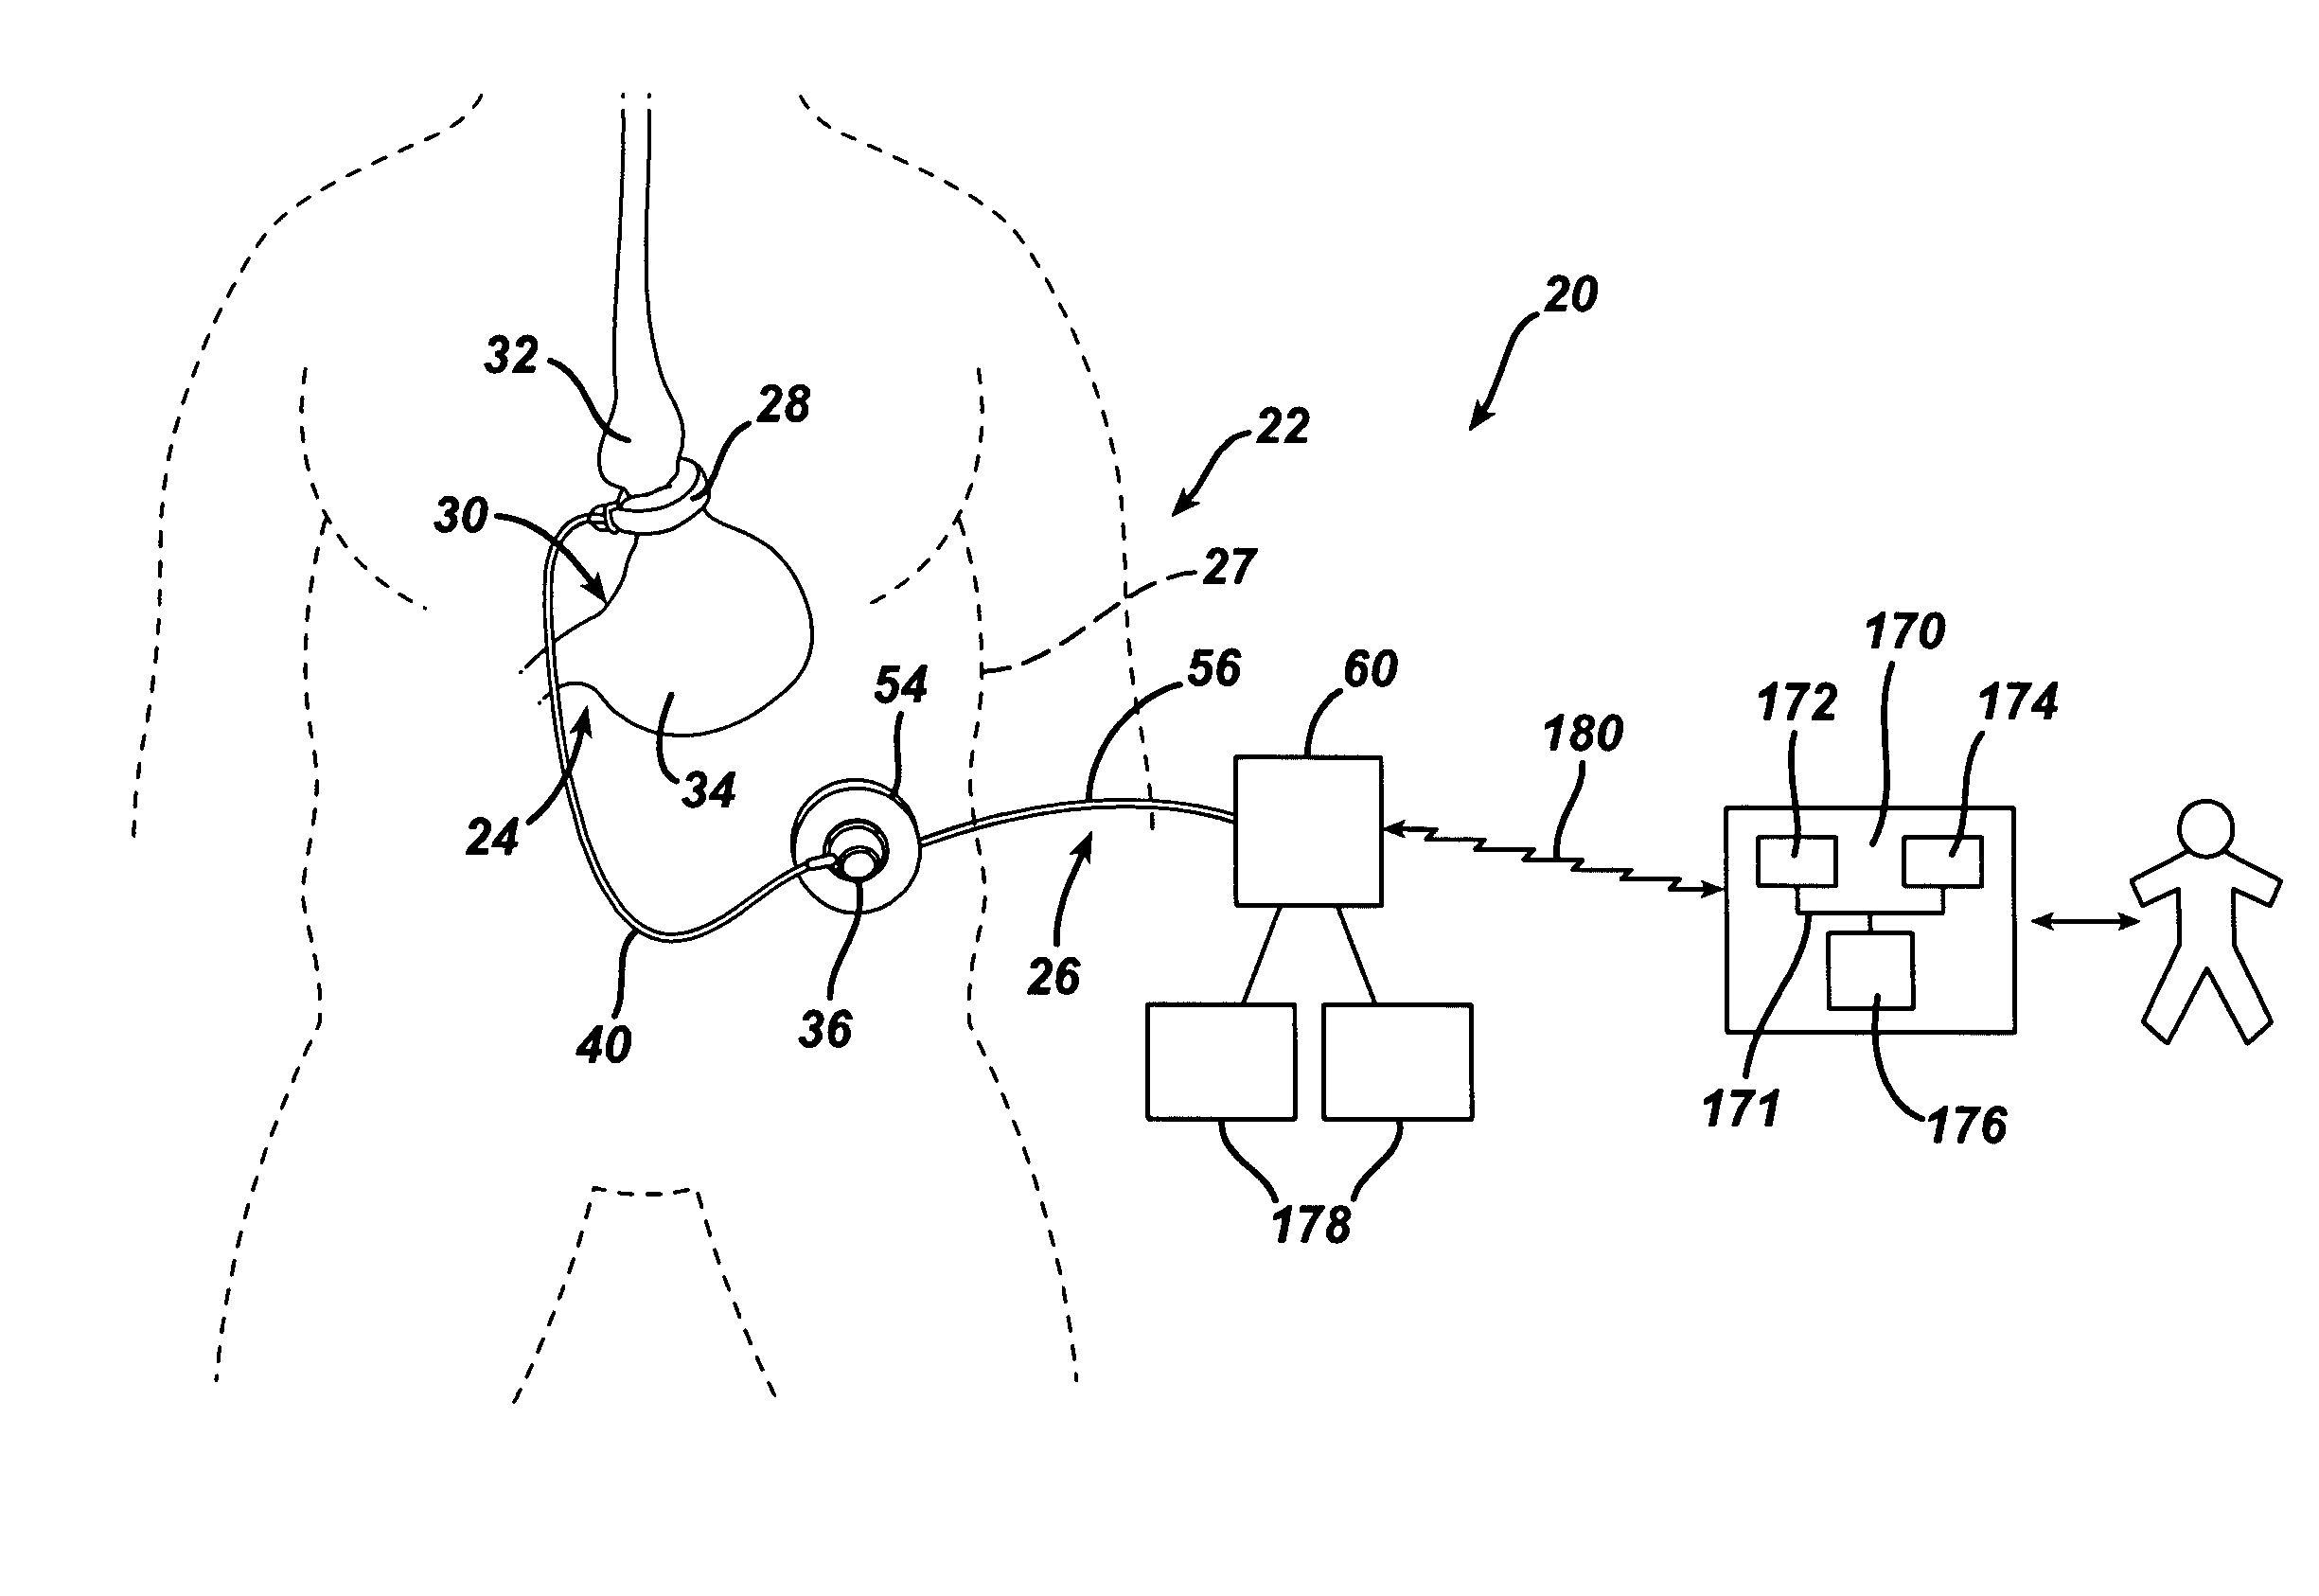 GUI for an Implantable Restriction Device and a Data Logger